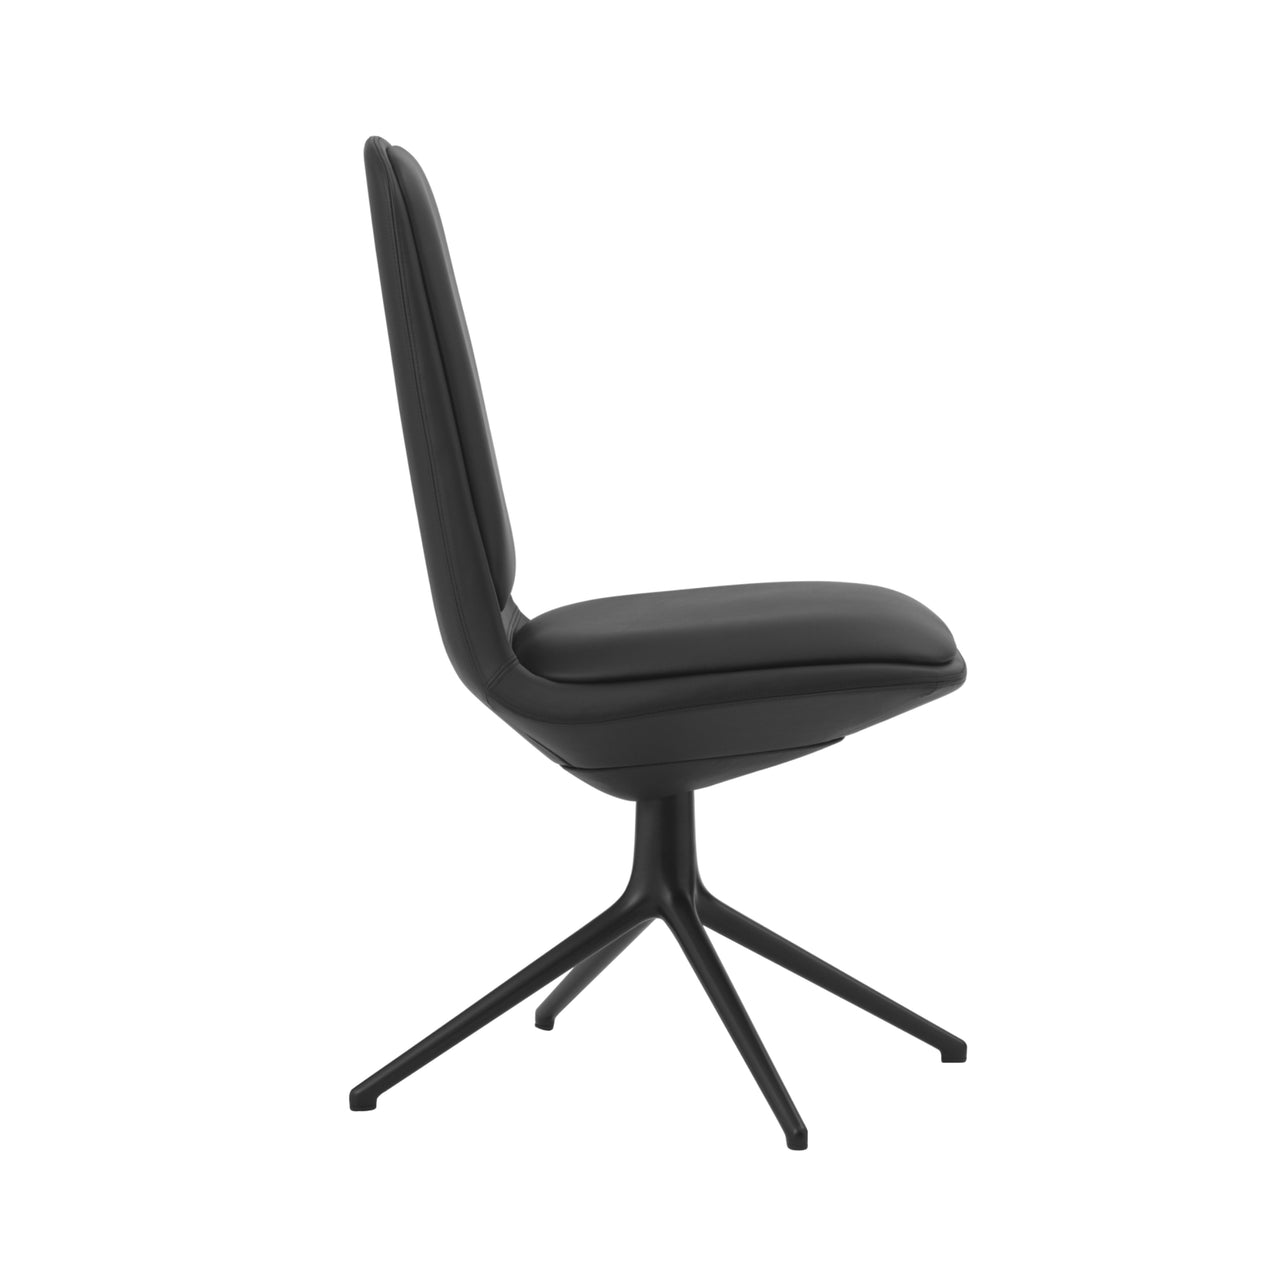 Off Chair 4 Legs with Cushion: Low + Without Arm + Black Aluminum